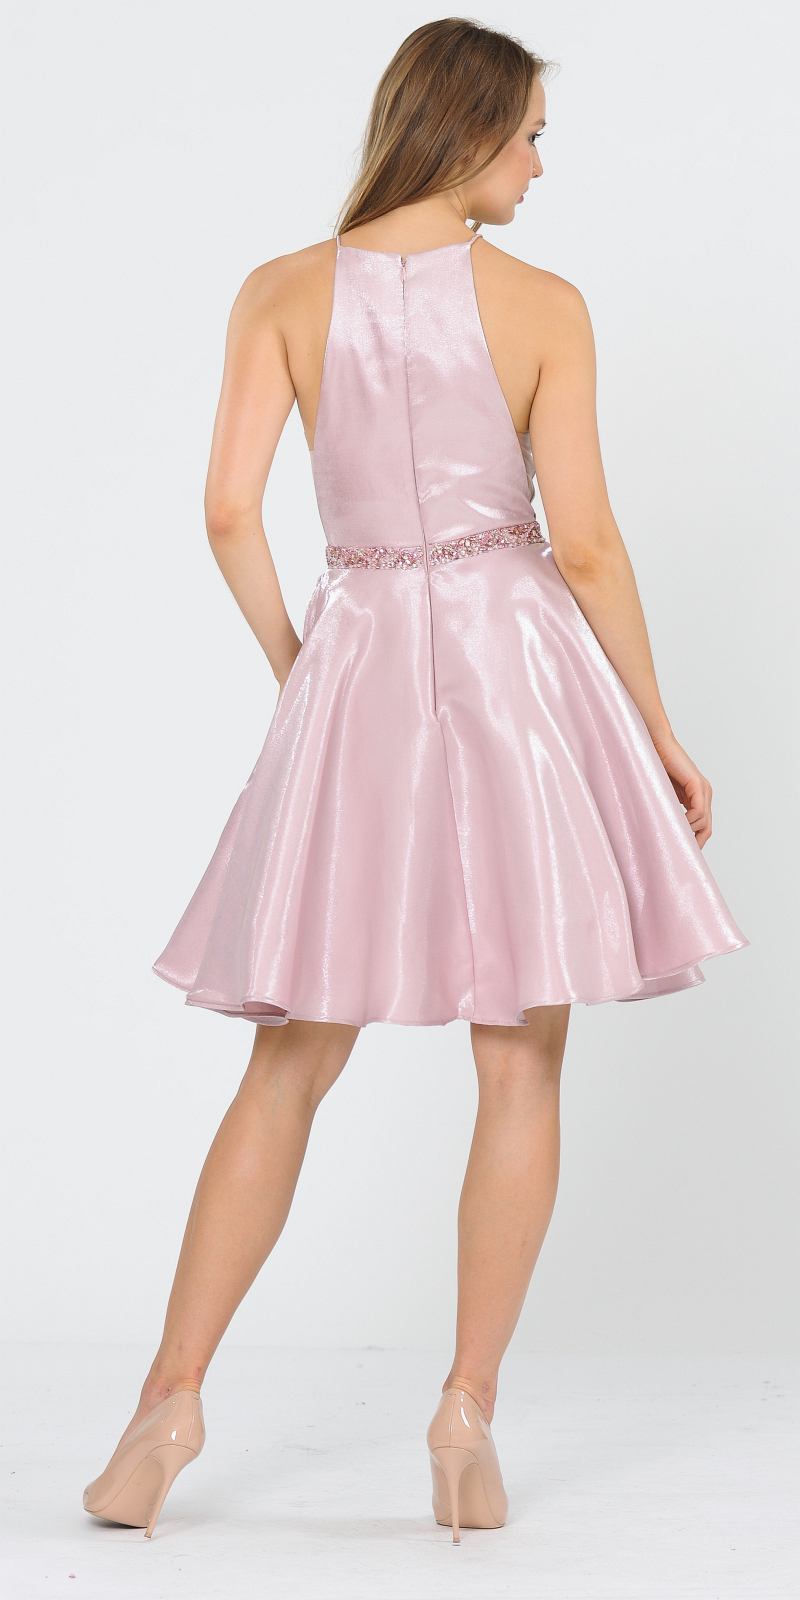 Poly USA 8236 Halter with Pockets Short Homecoming Dress Rose Gold